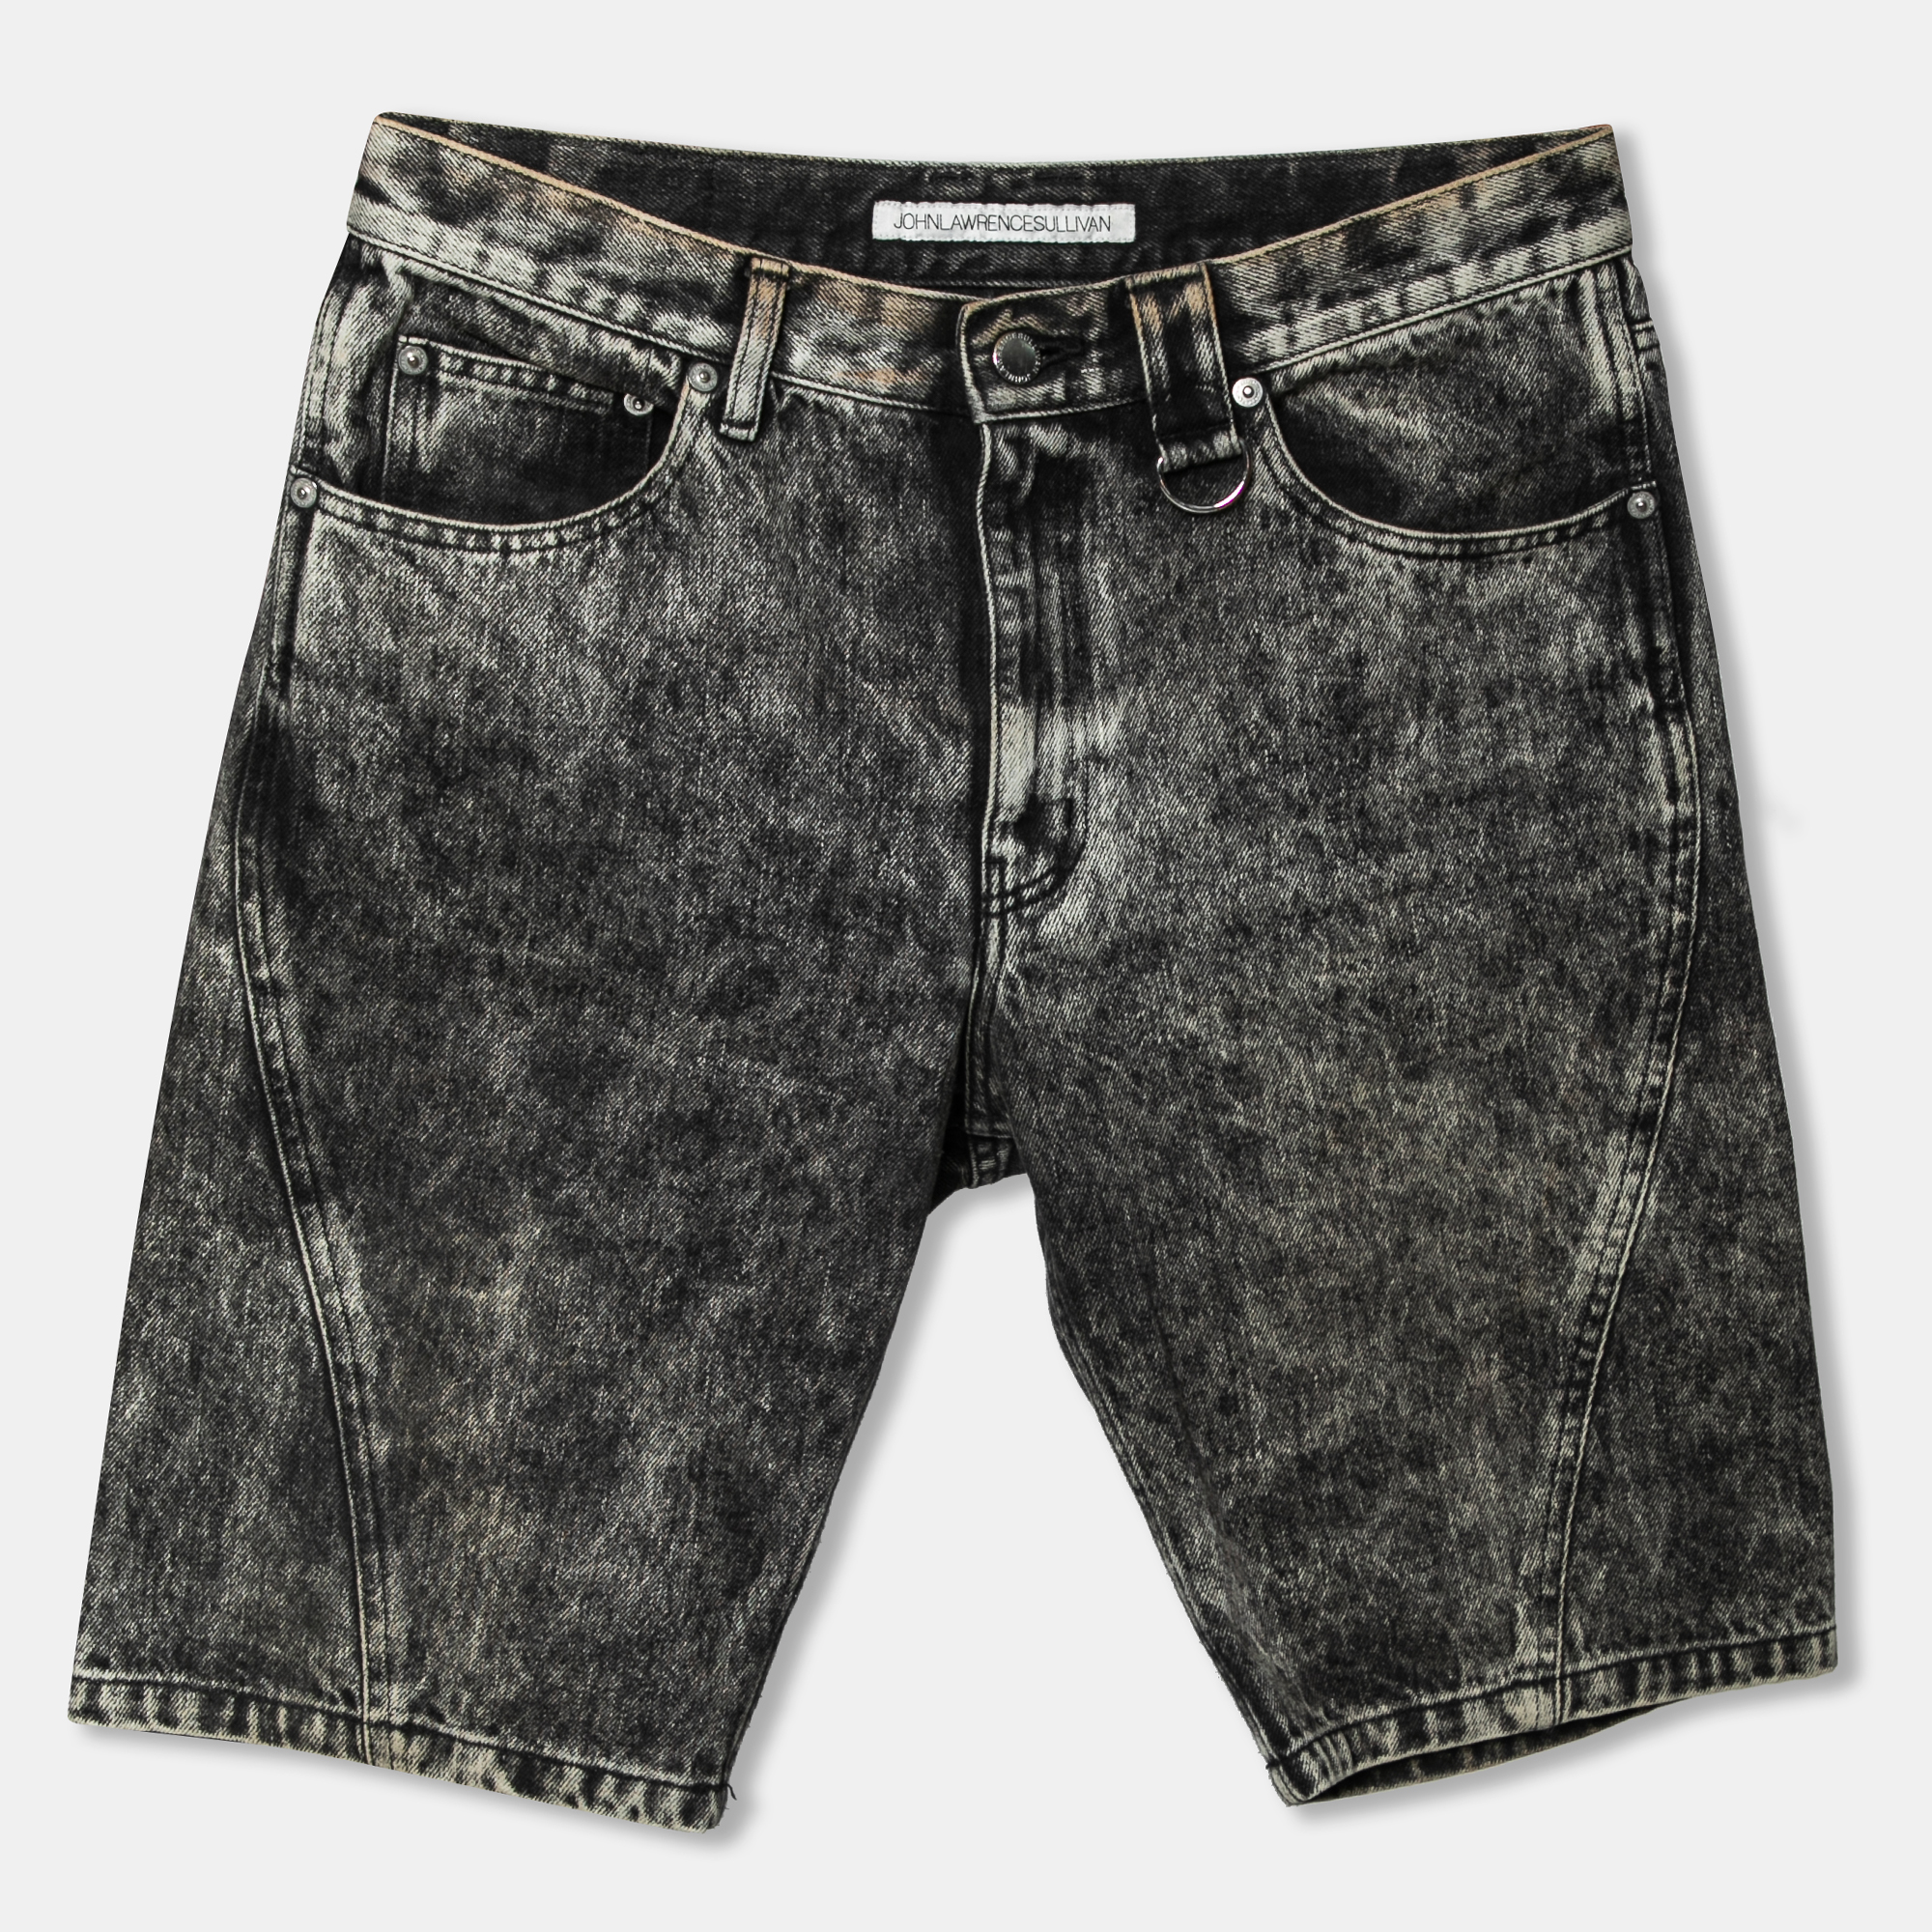 Update your wardrobe with these shorts from Johnlawrencesullivan. Designed for a comfy fit and stylish look these grey denim shorts have a front button closure five pockets and belt loops. Wear yours with a comfortable T shirt sneakers and sunglasses on a sunny day out.